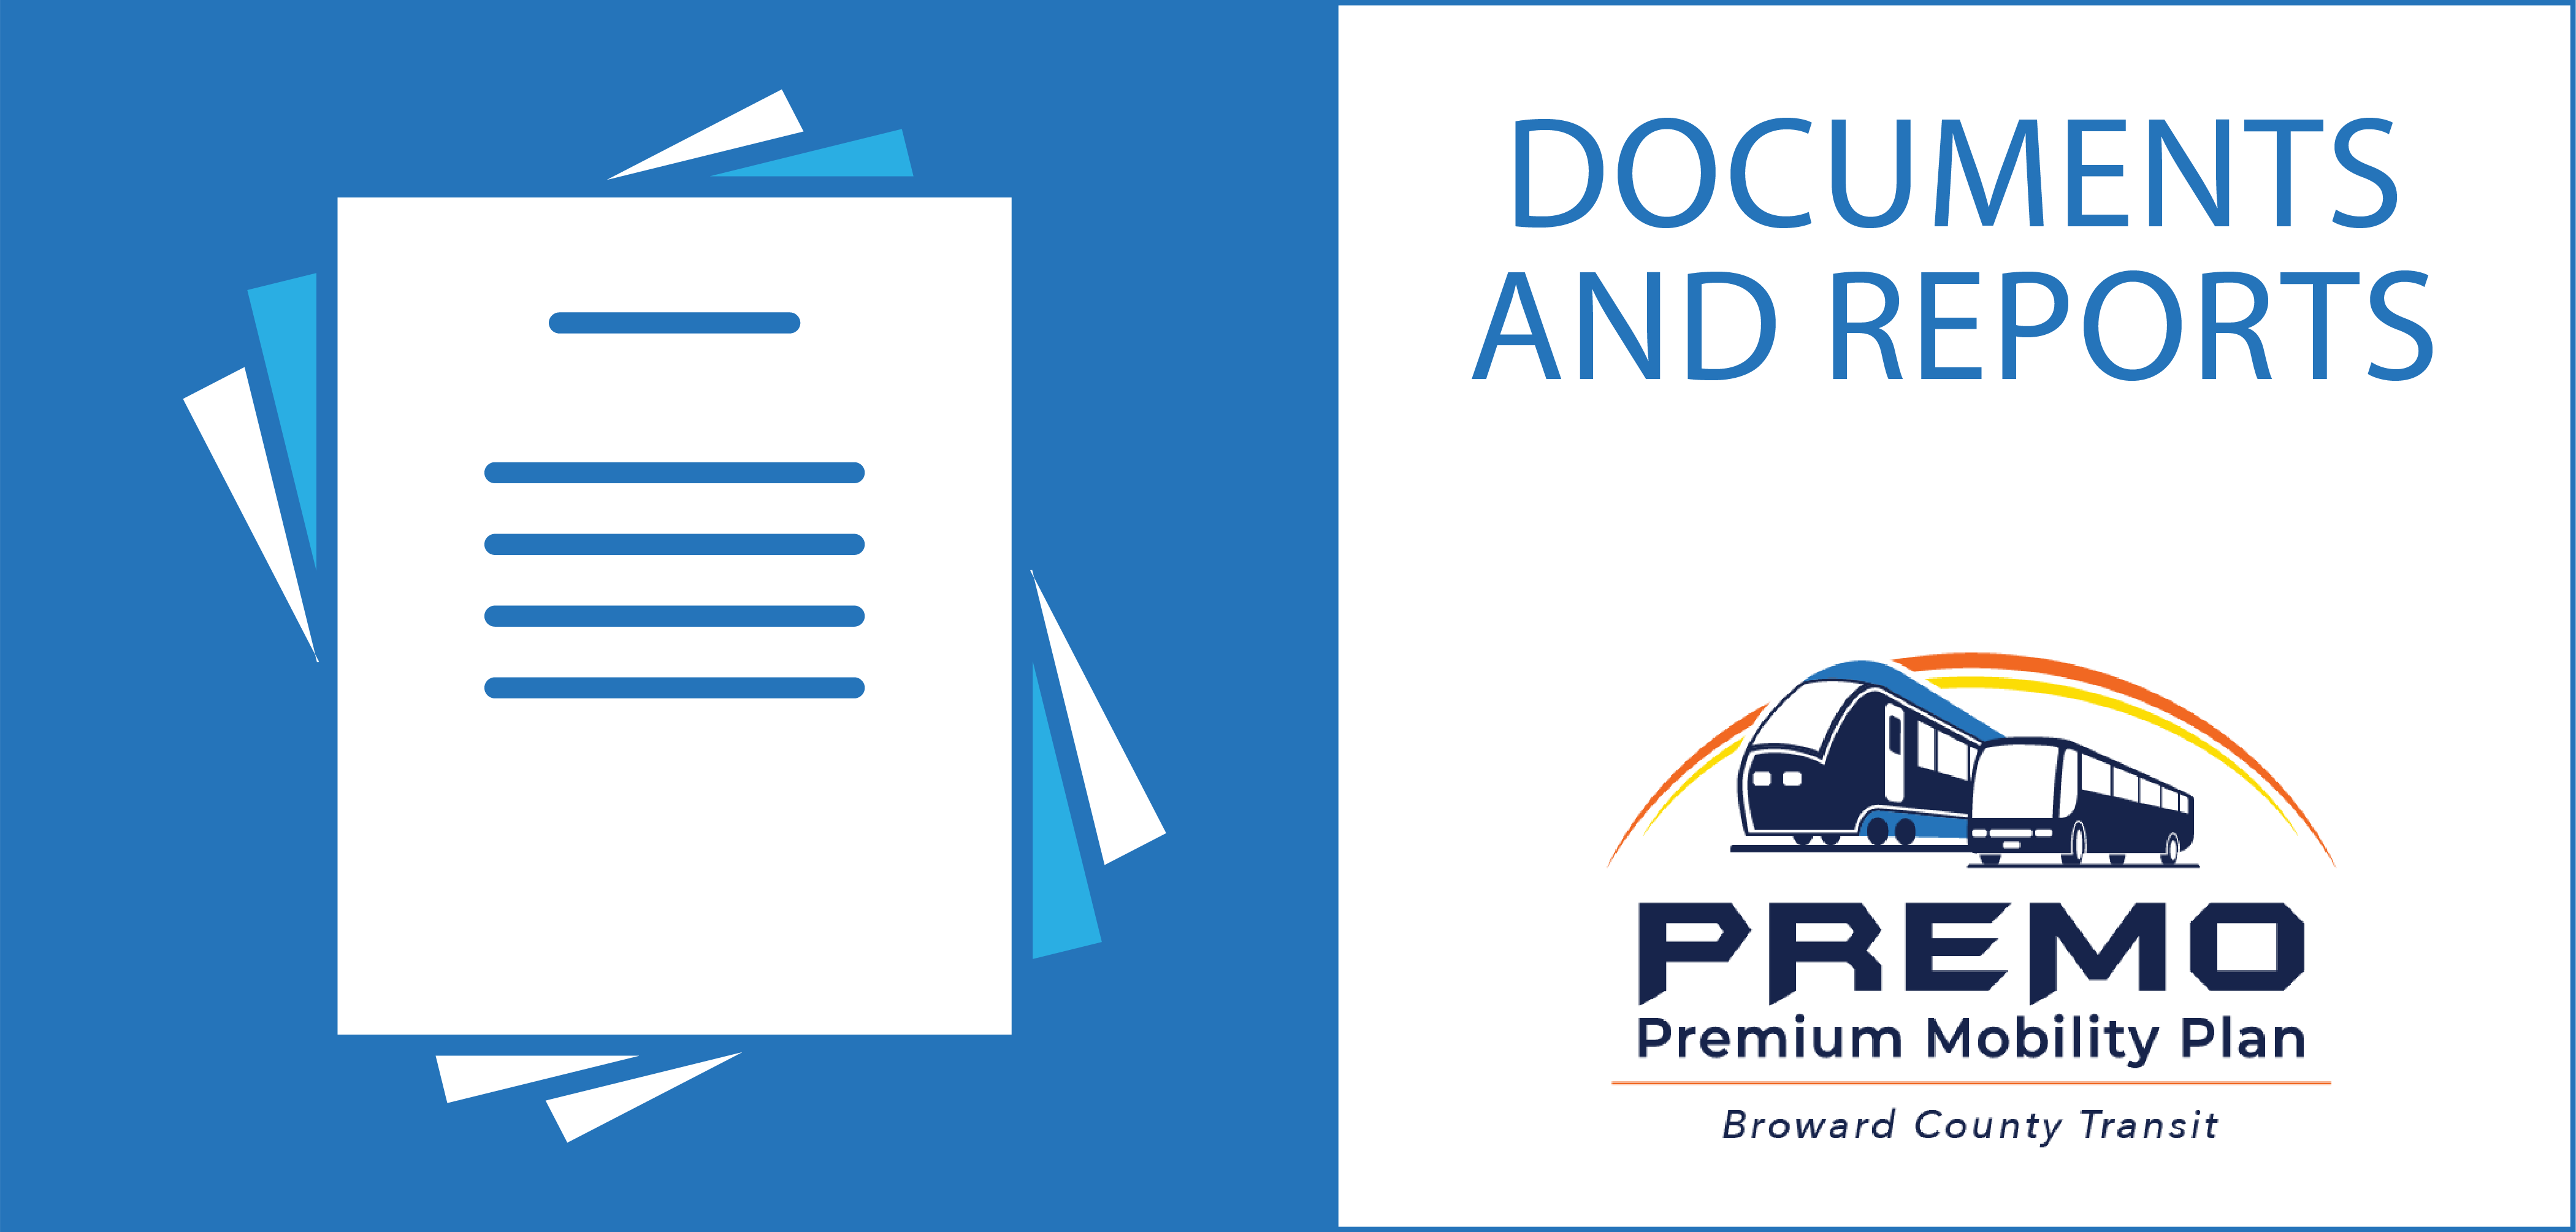 Documents and Reports